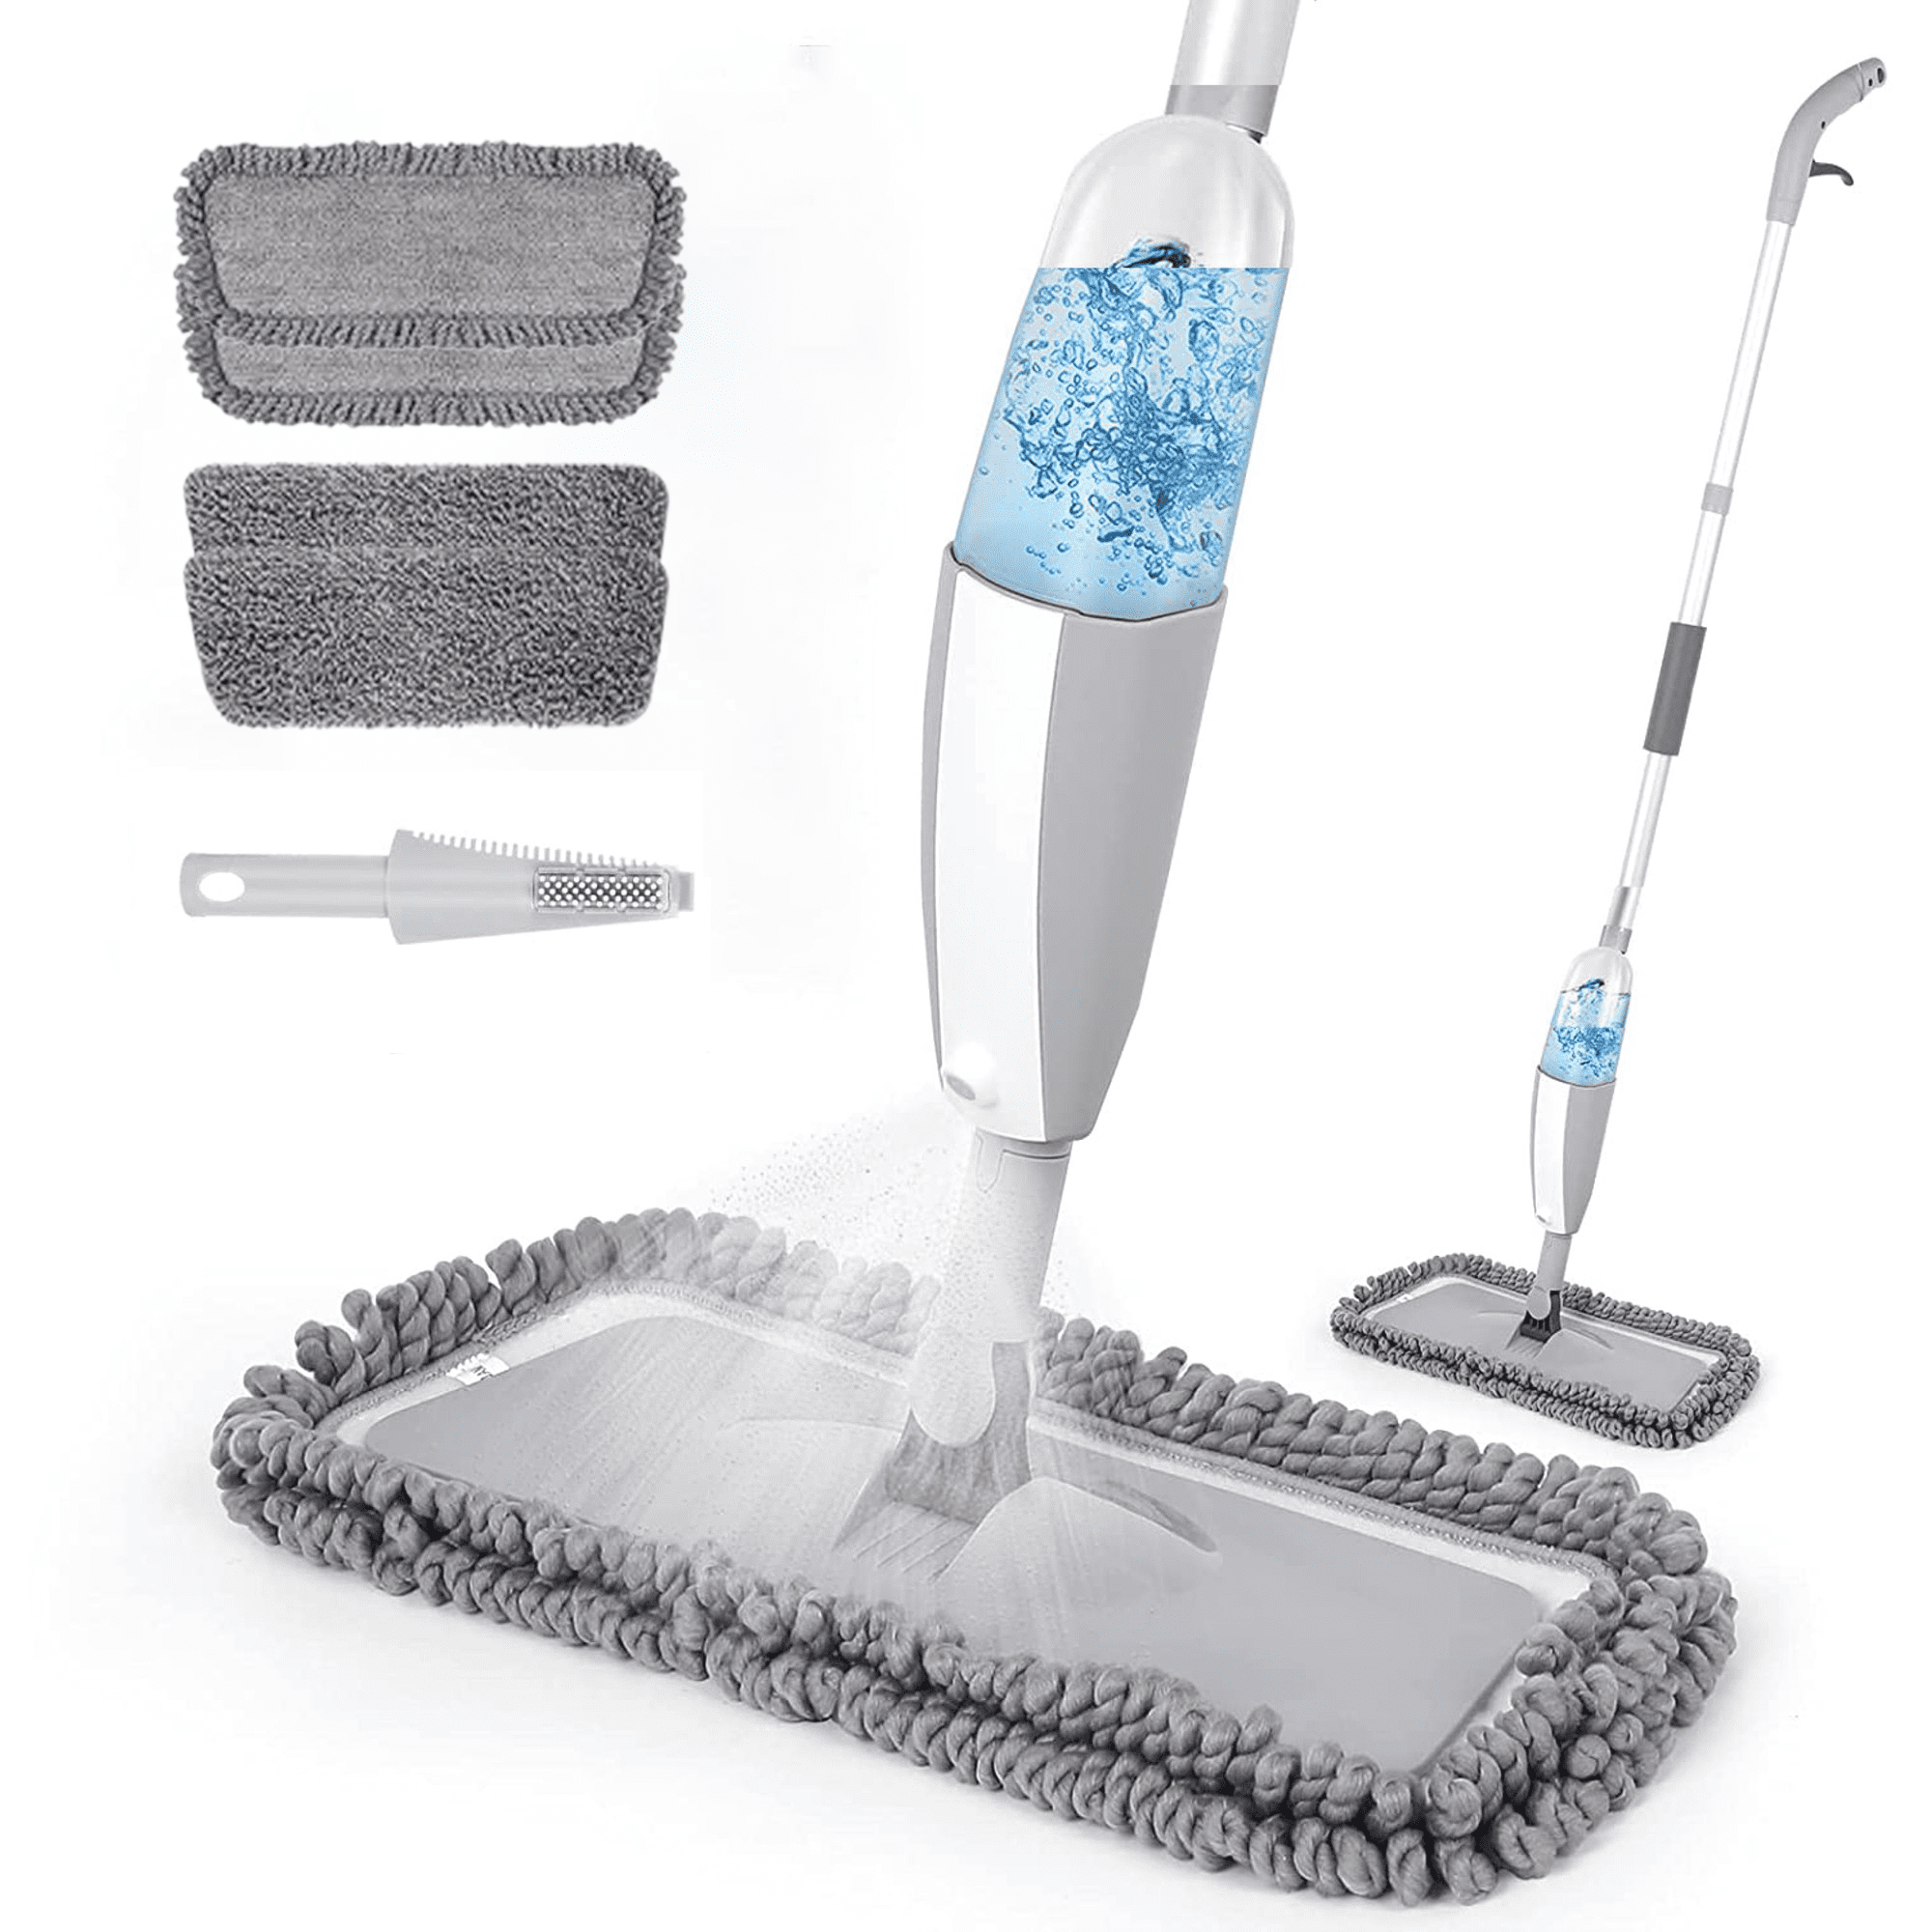 Microfiber Wet Mops for Floor Cleaning - The Clean Team